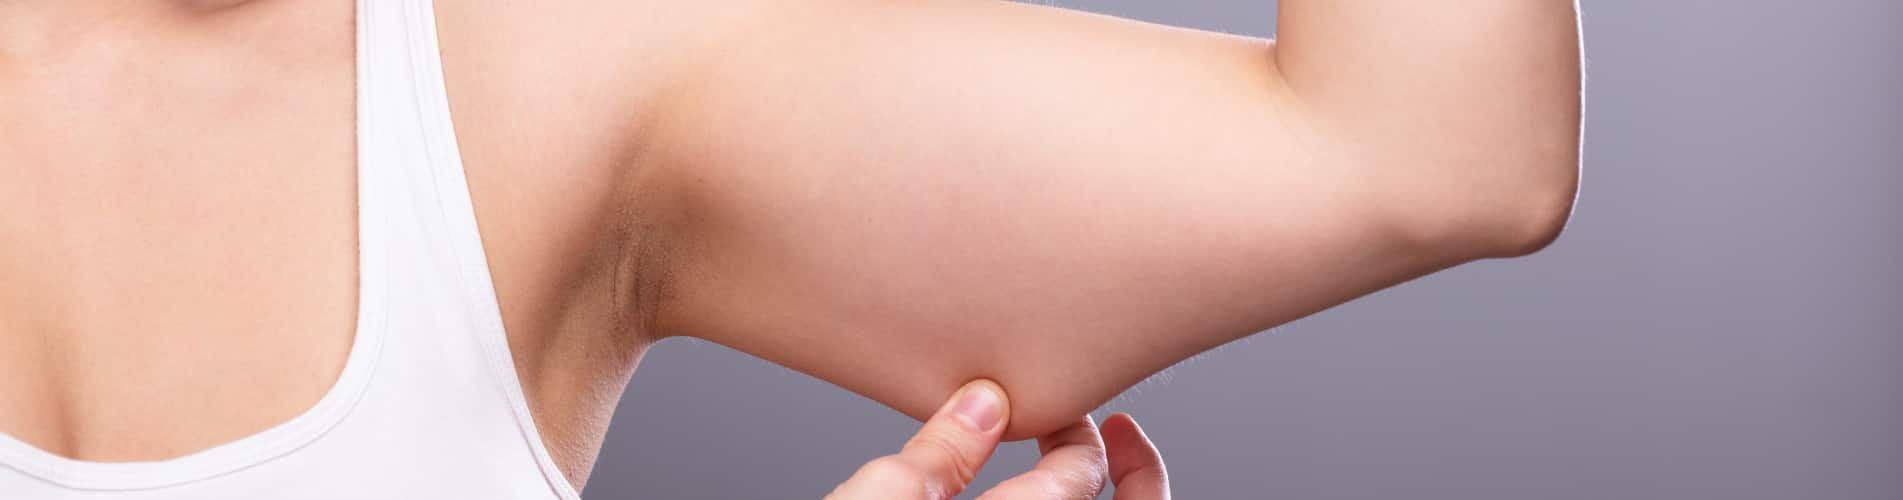 Exercises To Reduce Armpit Fat